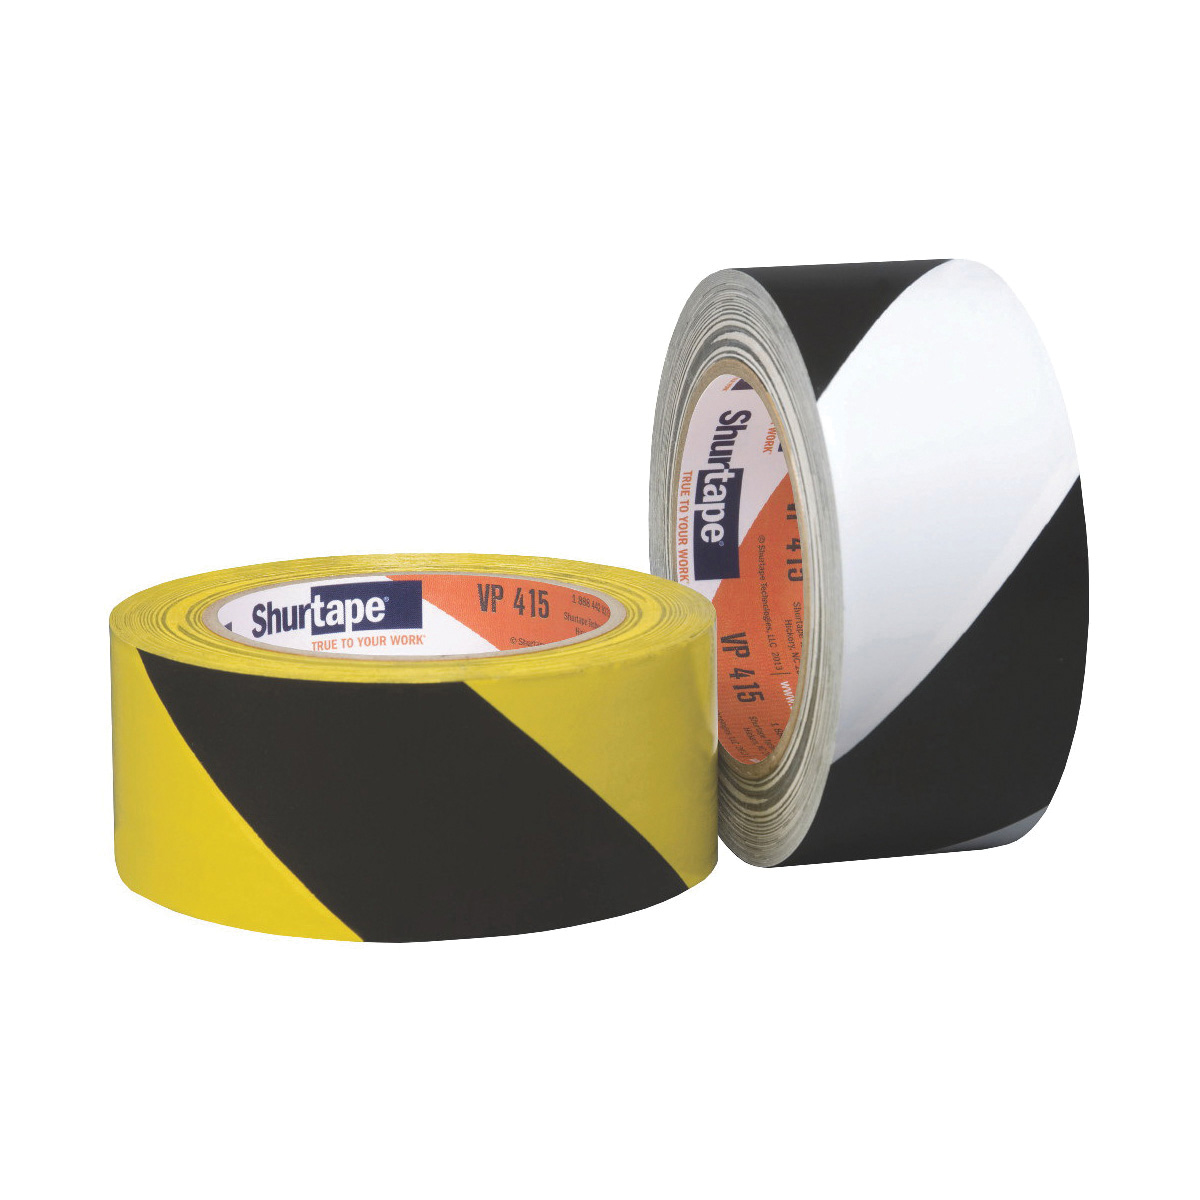 Shurtape® 202682 PC 600C All Purpose Grade Colored Conformable Duct Tape, 55 m L x 48 mm W, 9 mil THK, Rubber Adhesive, Polyethylene Film with Cloth Carrier Backing, Orange